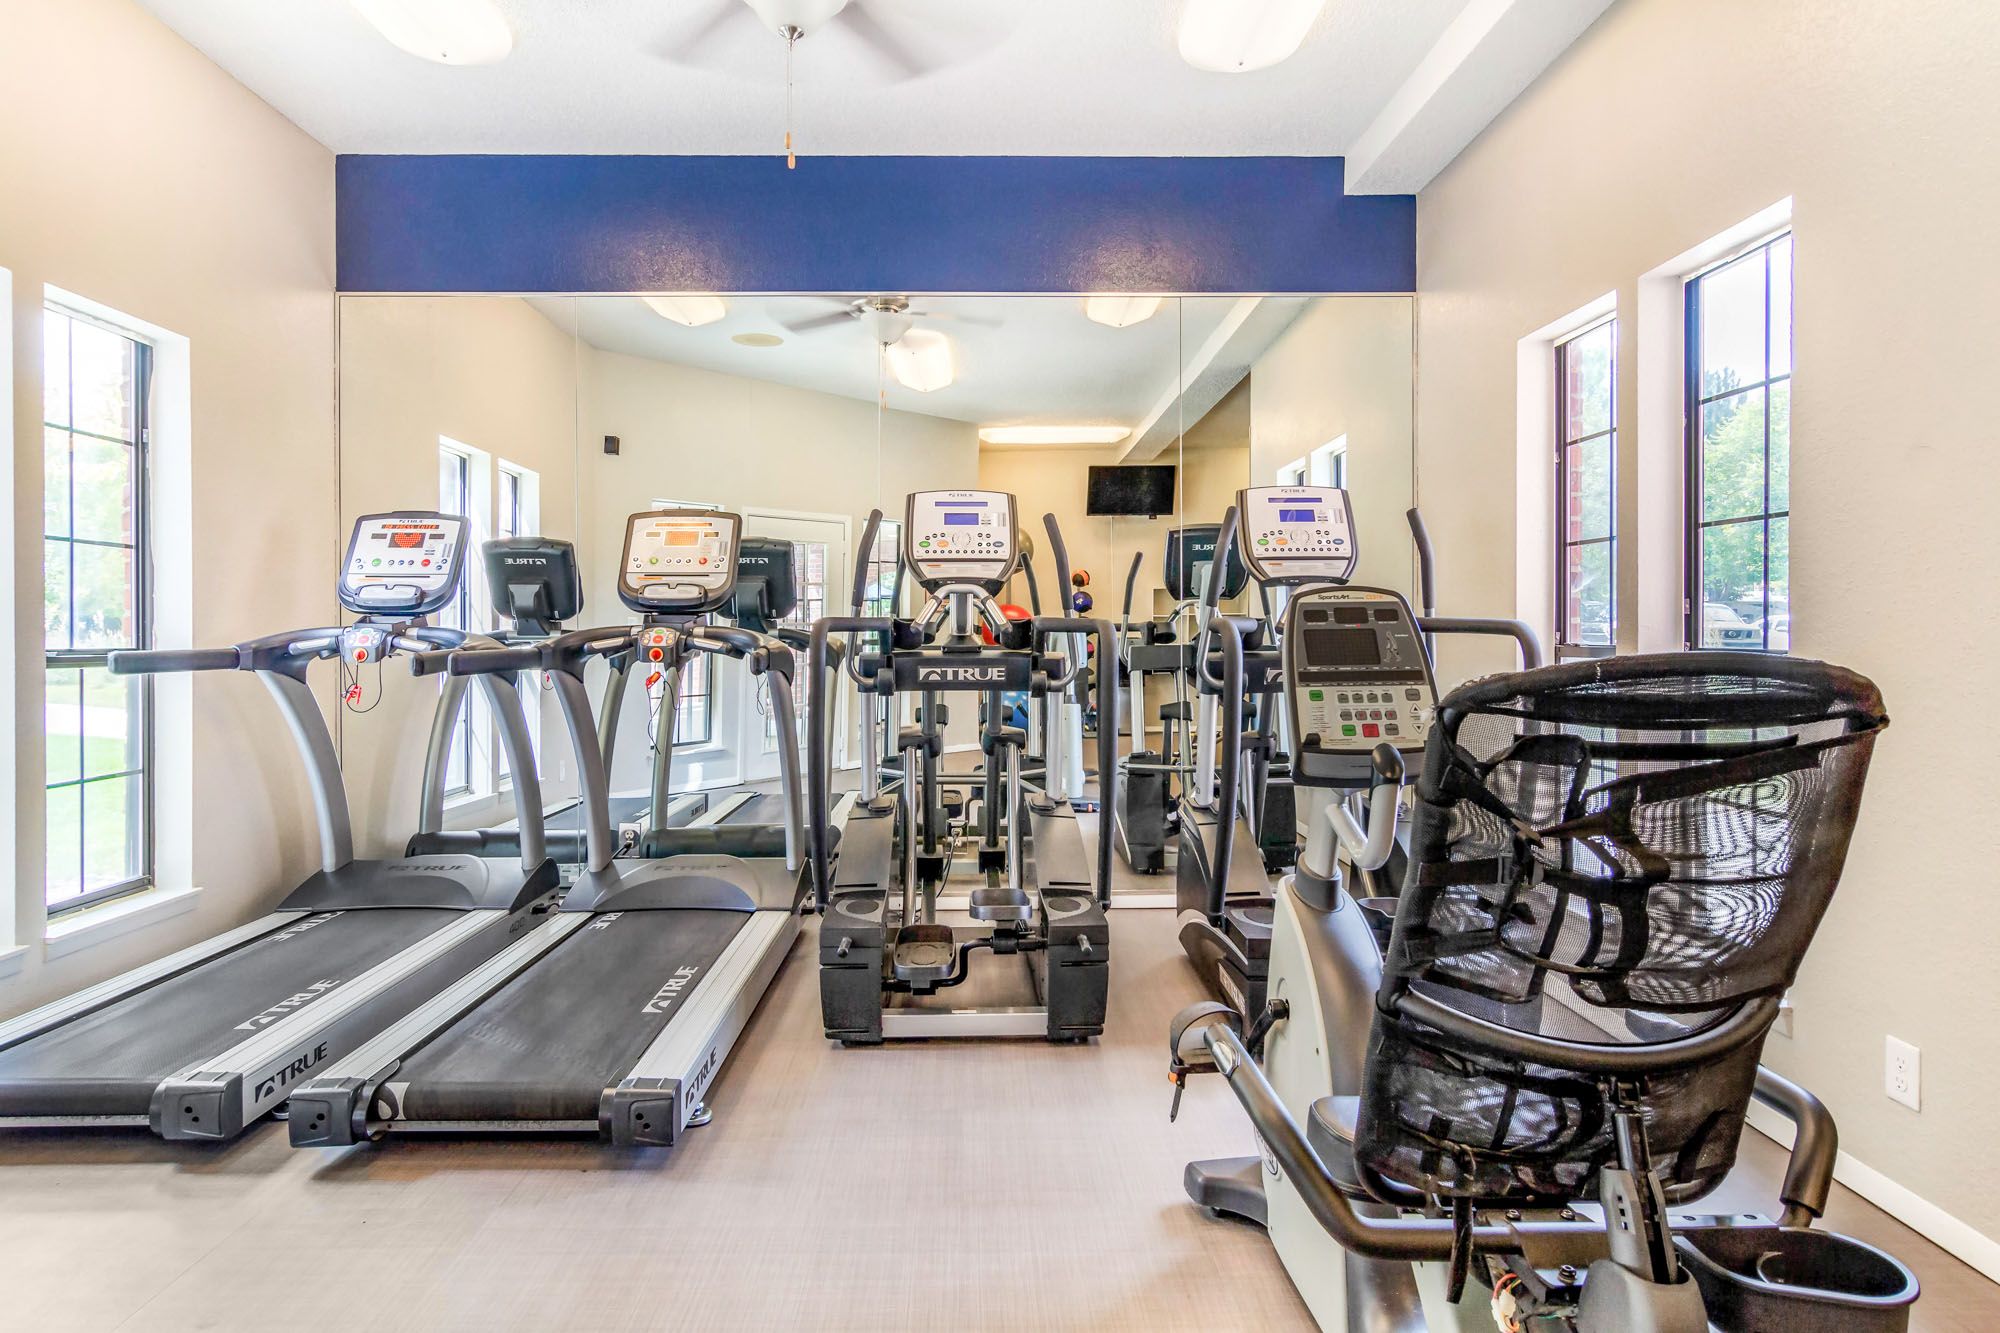 The fitness center at Canyon Chase apartments in Westminster, CO.